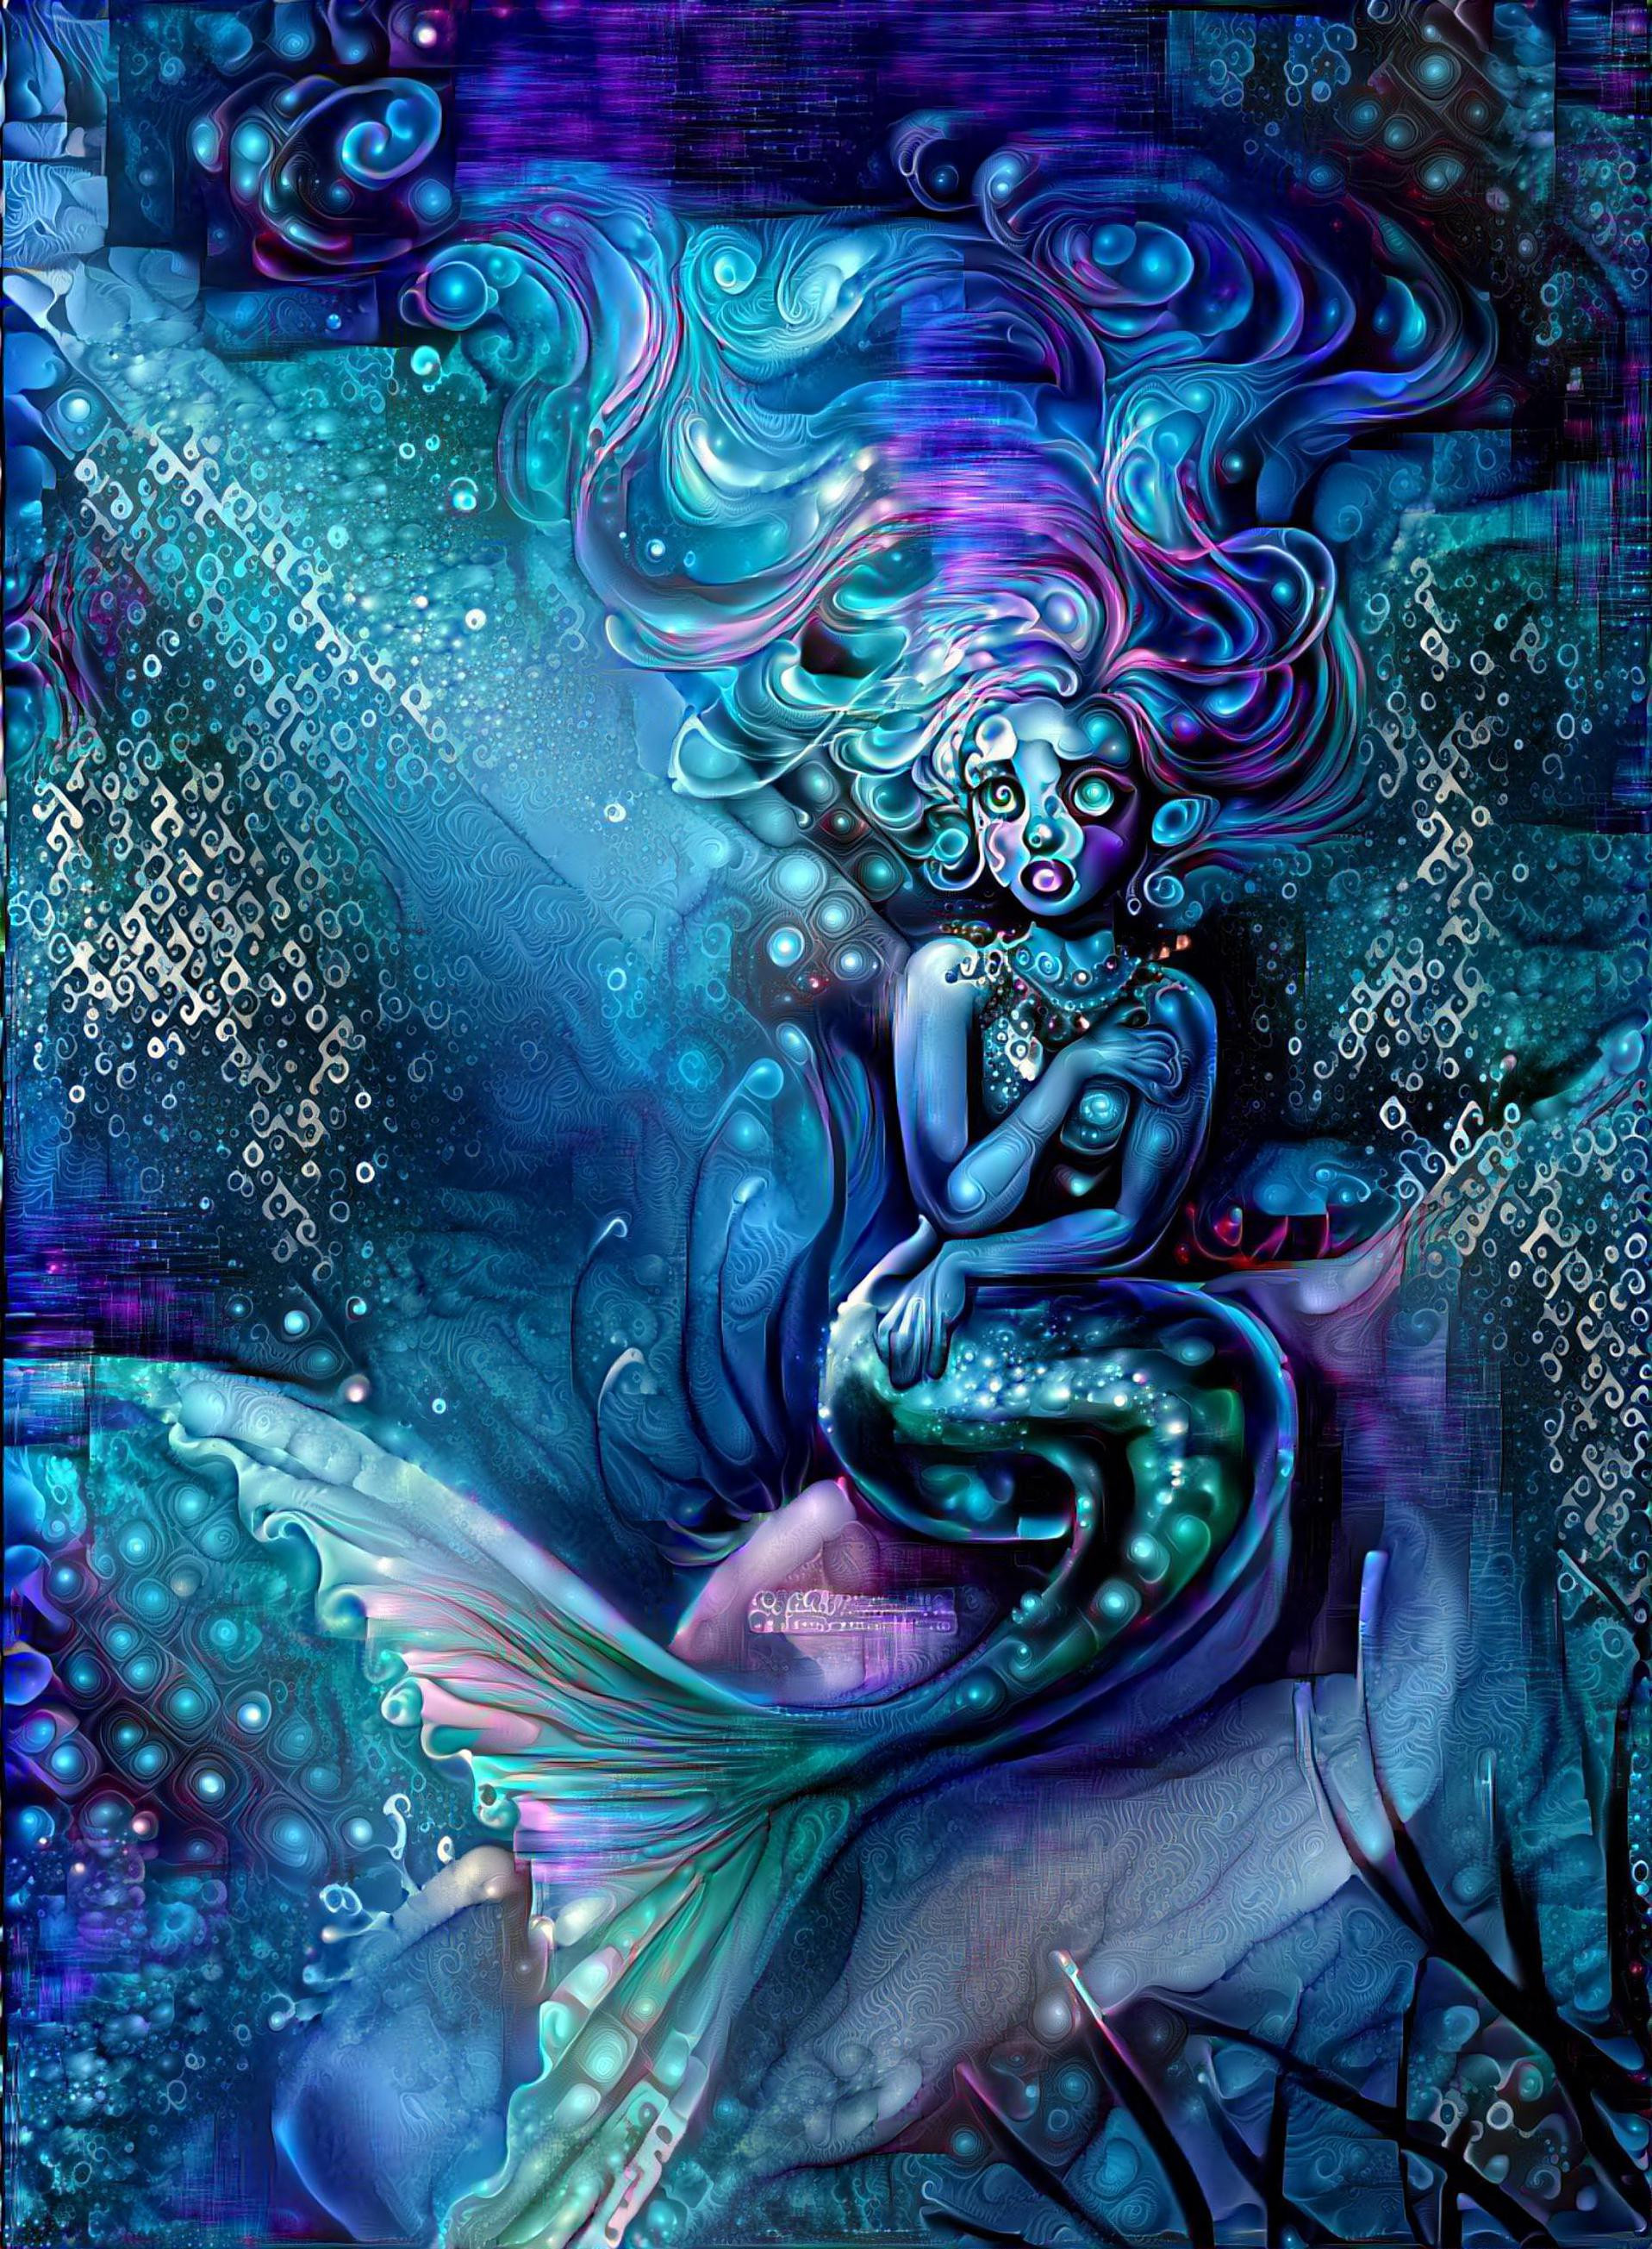 Another Mermaid 